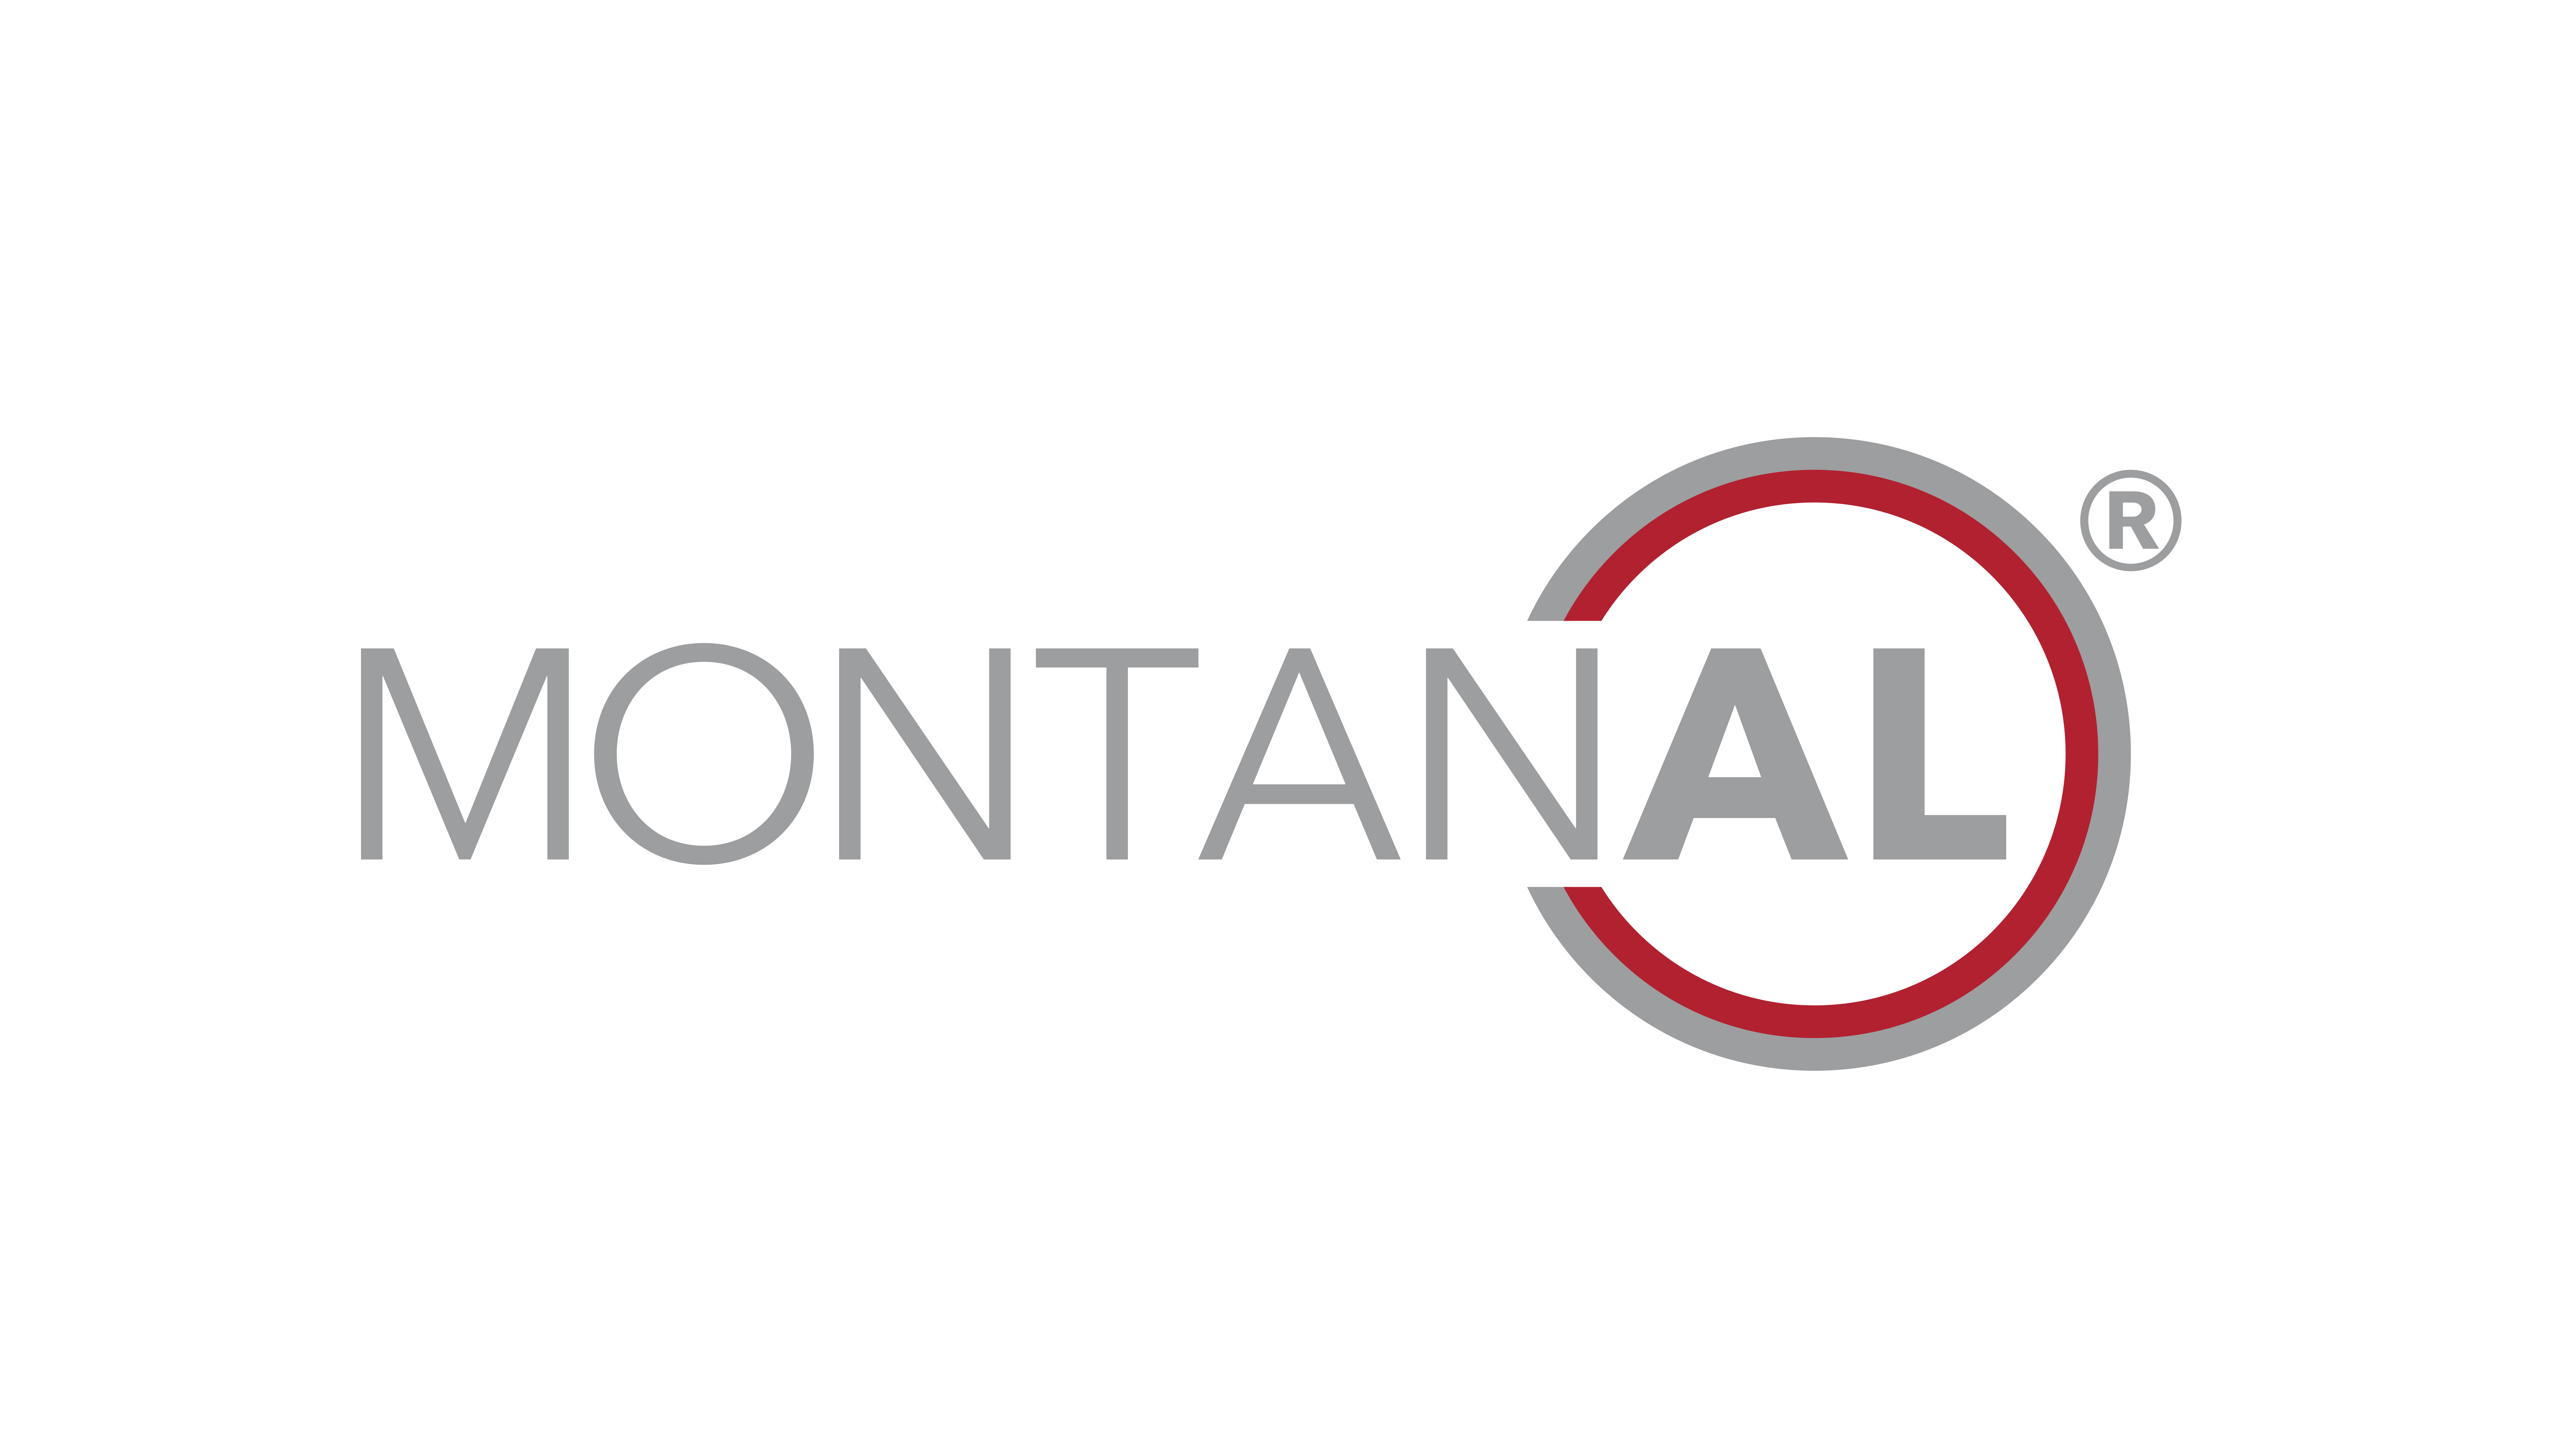 Montanal - Waste management product